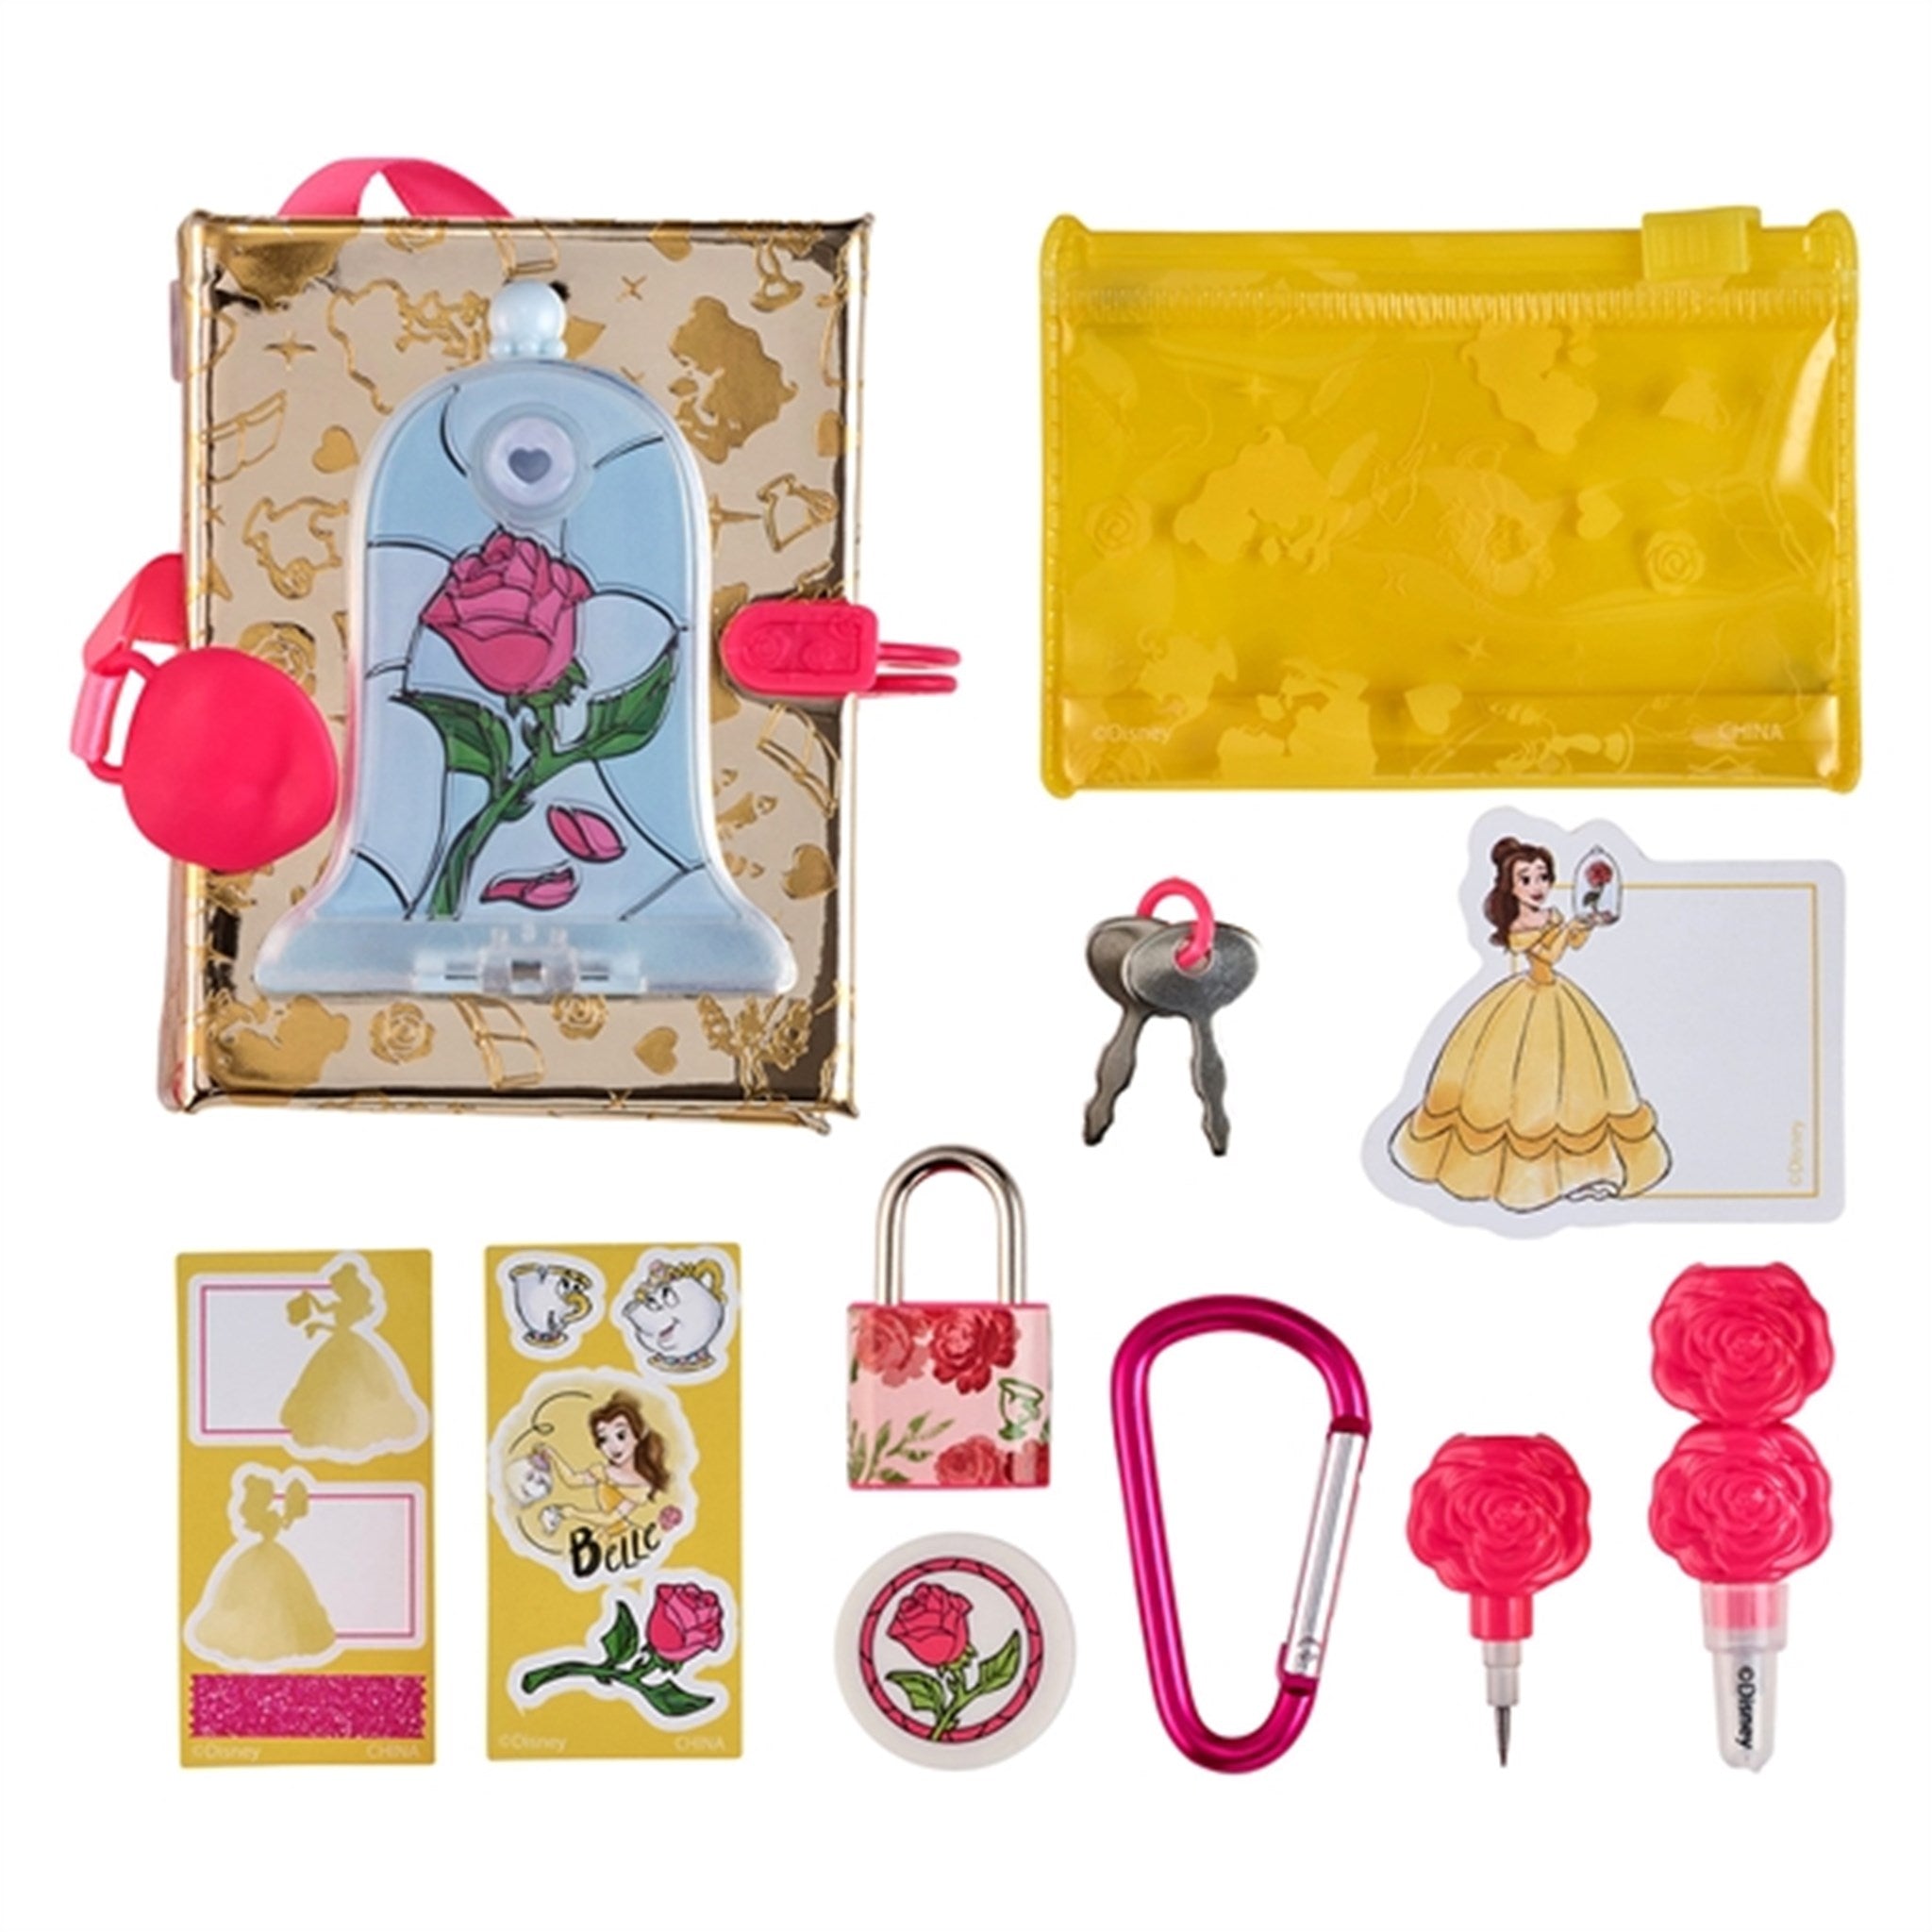 Real Littles Disney Journal Beauty and the Beast 2